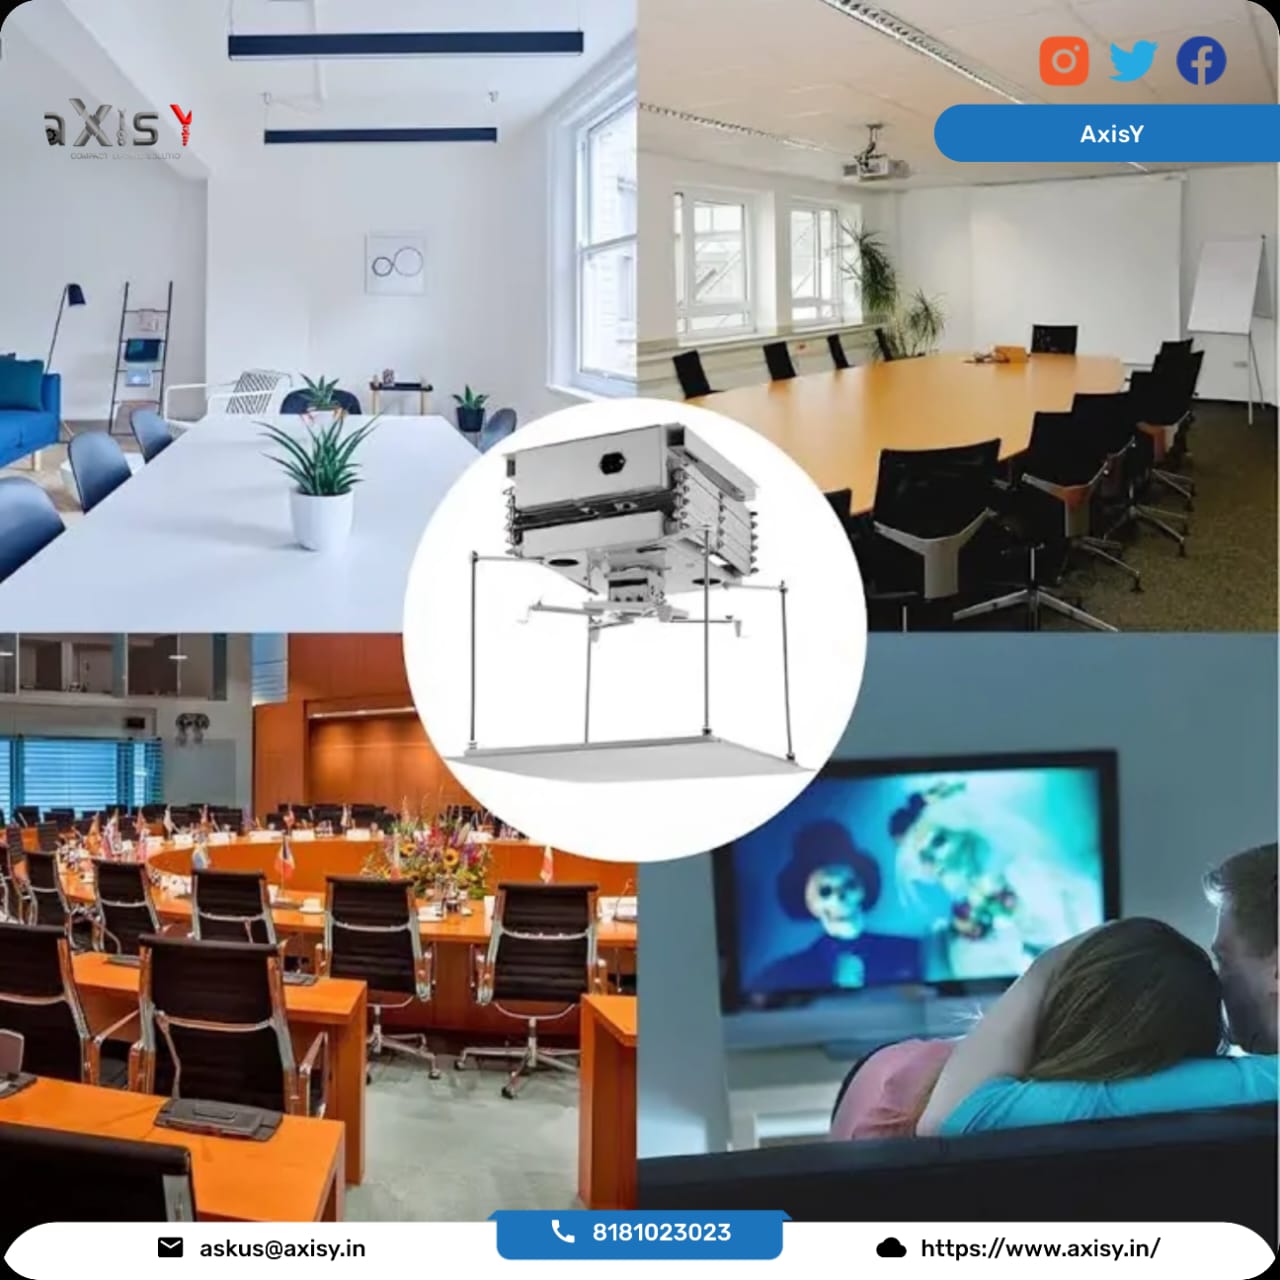  Elevate Your Presentations with Axisy: The Best Projector Lift on the Market